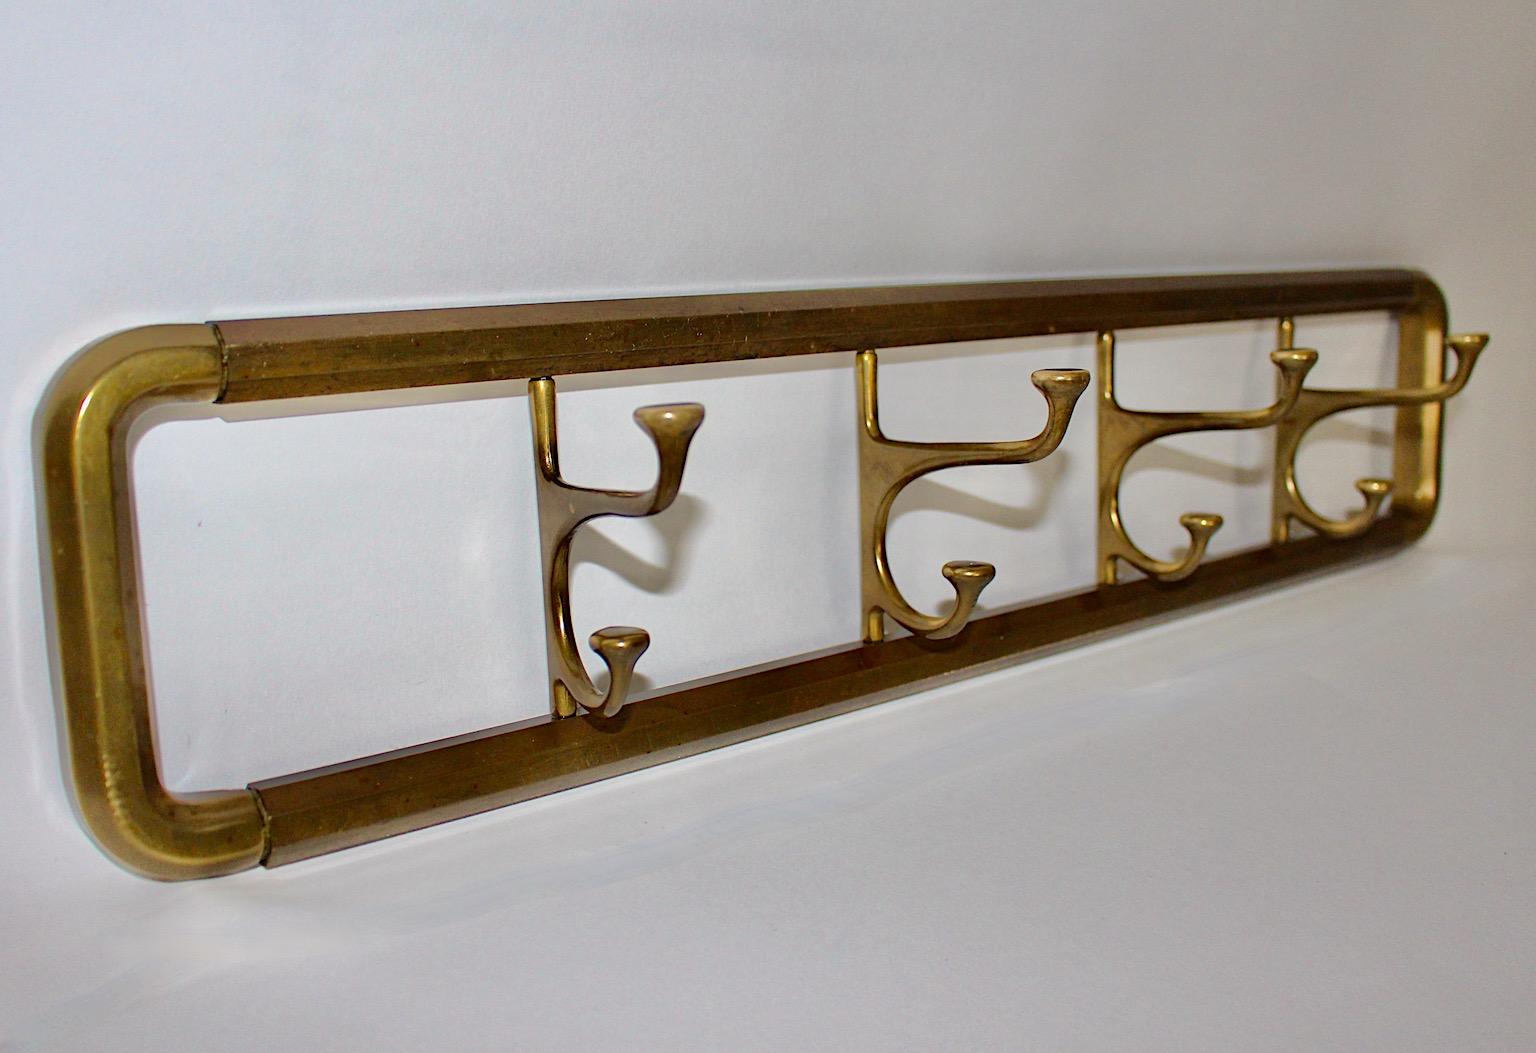 Art Deco vintage wall mounted coat rack or coat hooks or towel rack from brass 1930s Austria.
An amazing wall mounted rack from brass with 4 swiveling hooks and 4 smaller sized hooks with beautiful patina.
This rectangular coat rack works